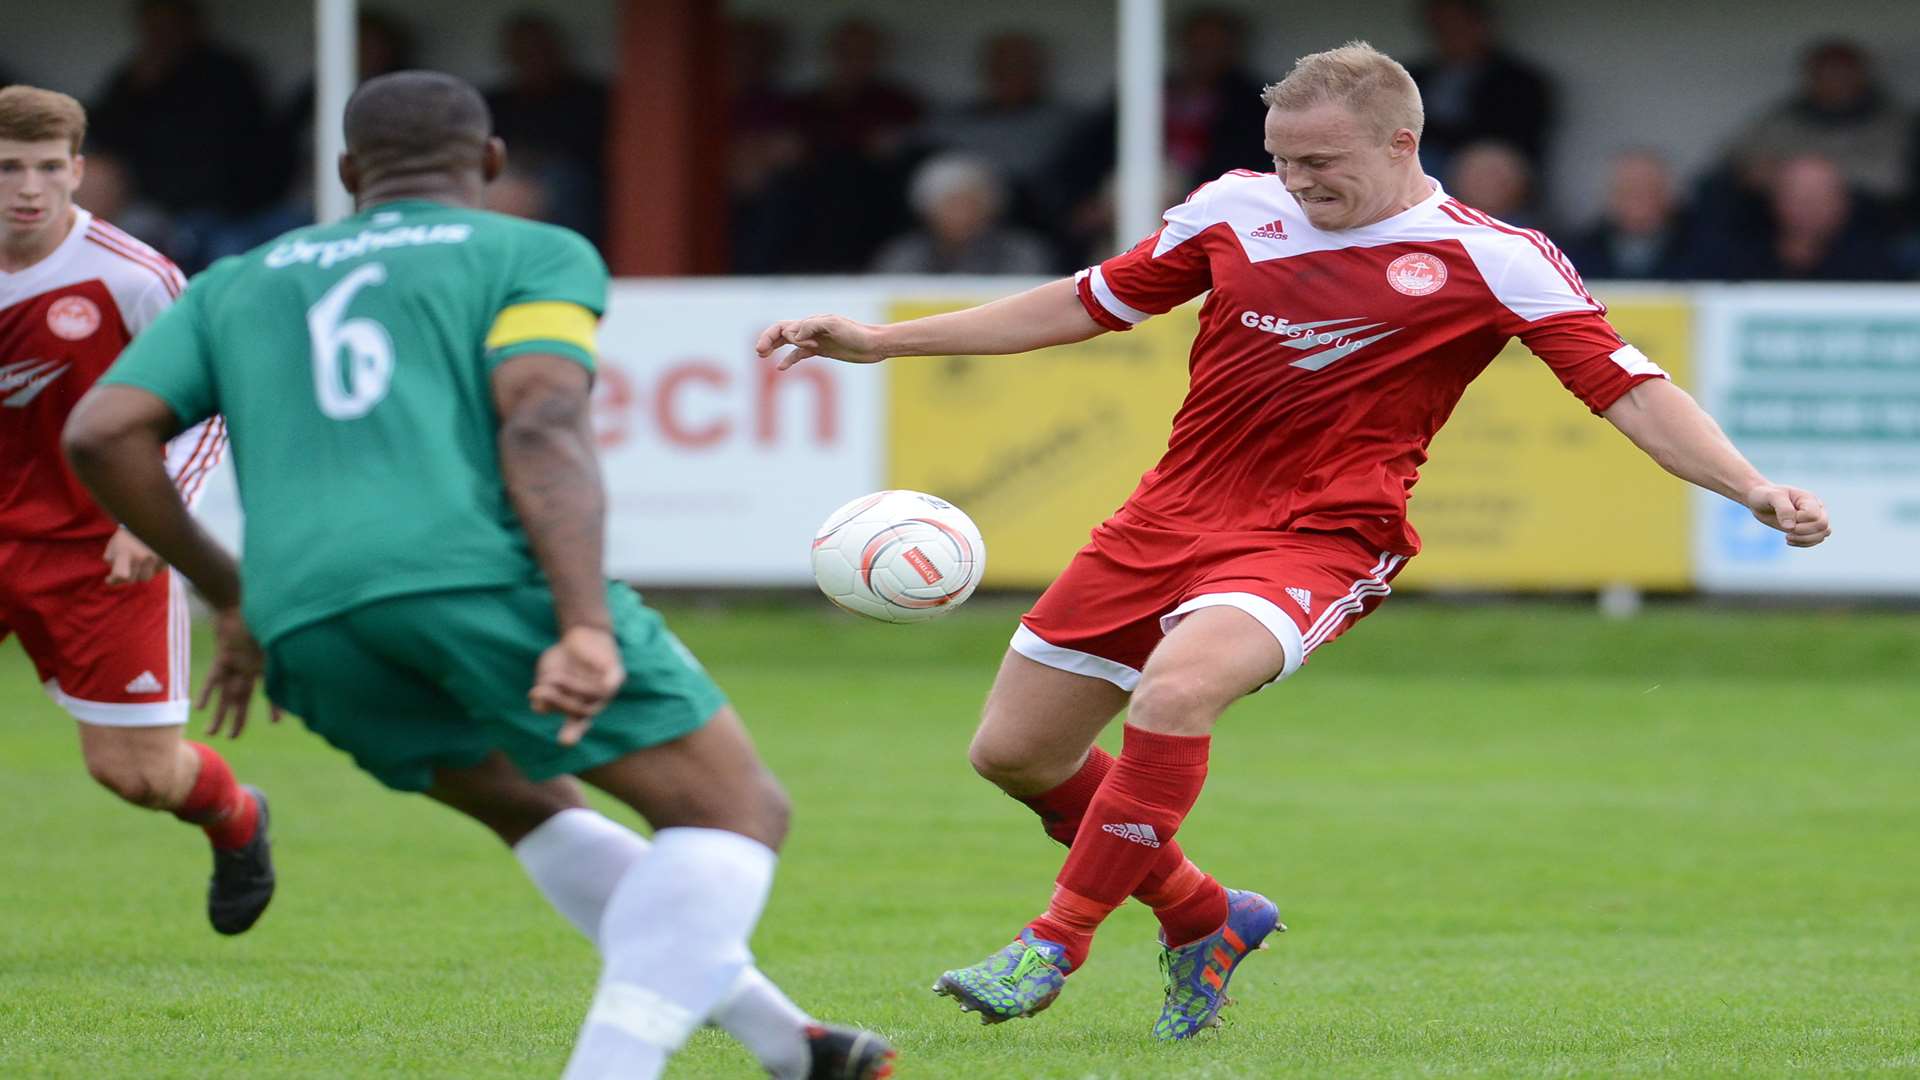 Stuart Zanone's only home game for Hythe was against Whyteleafe Picture: Gary Browne